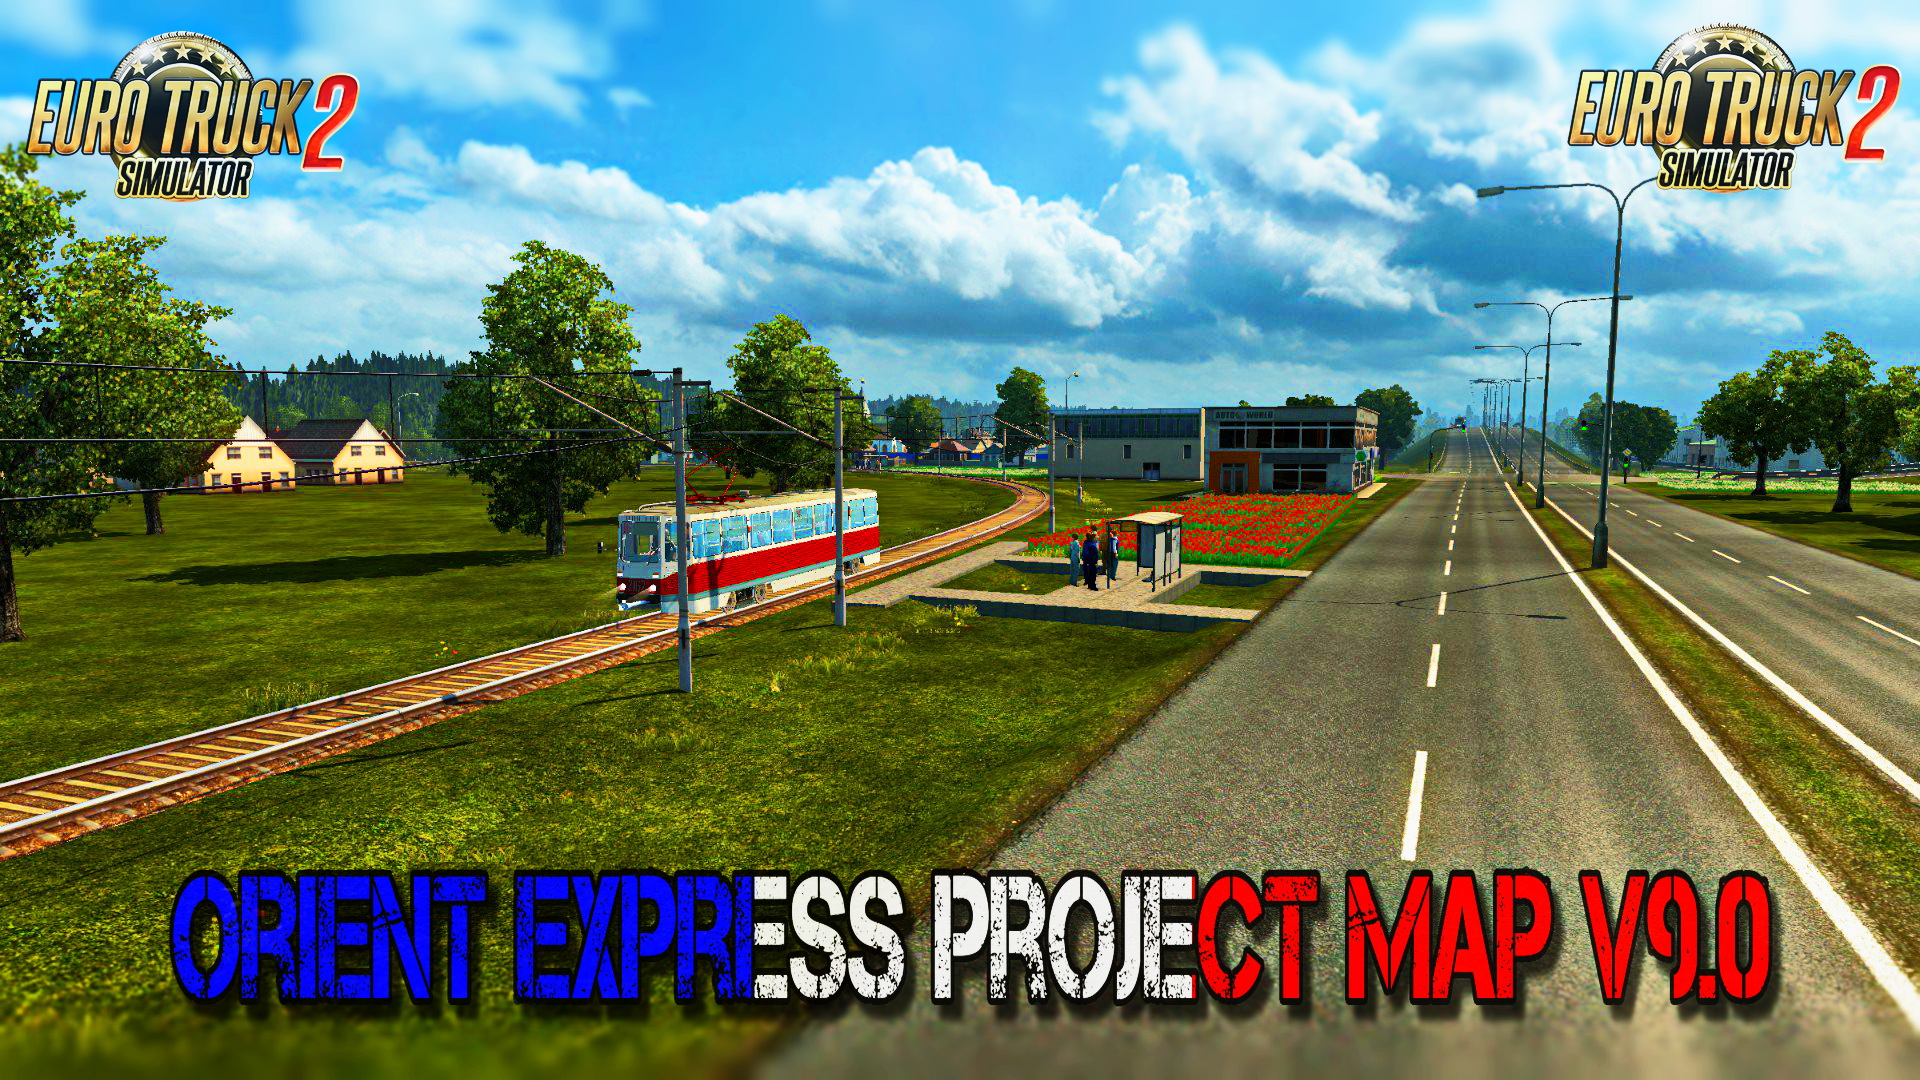 Orient Express Project Map v9.0